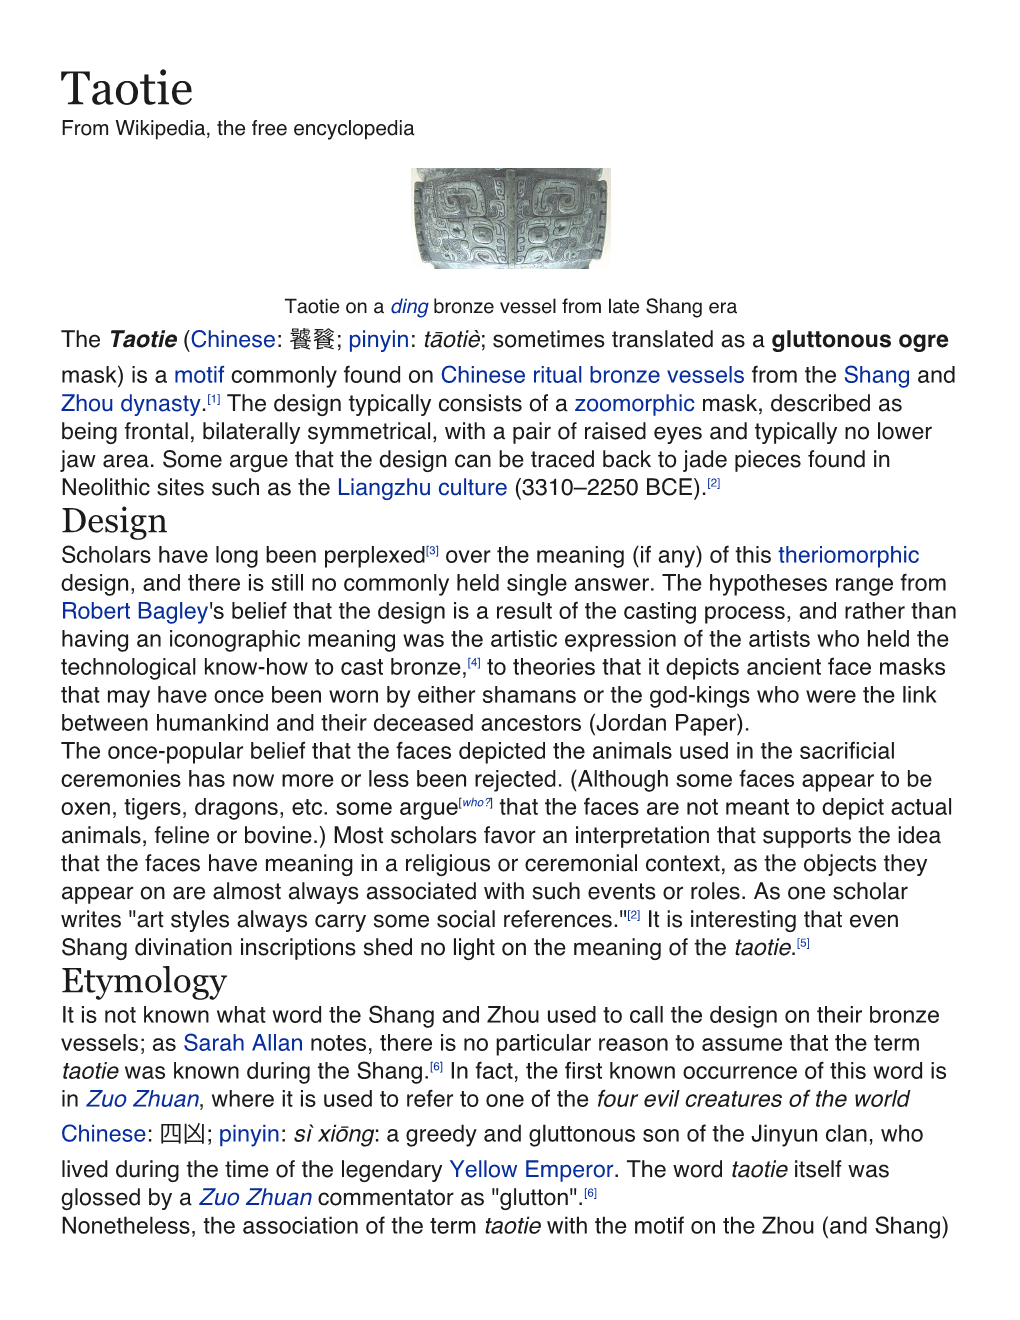 Taotie from Wikipedia, the Free Encyclopedia